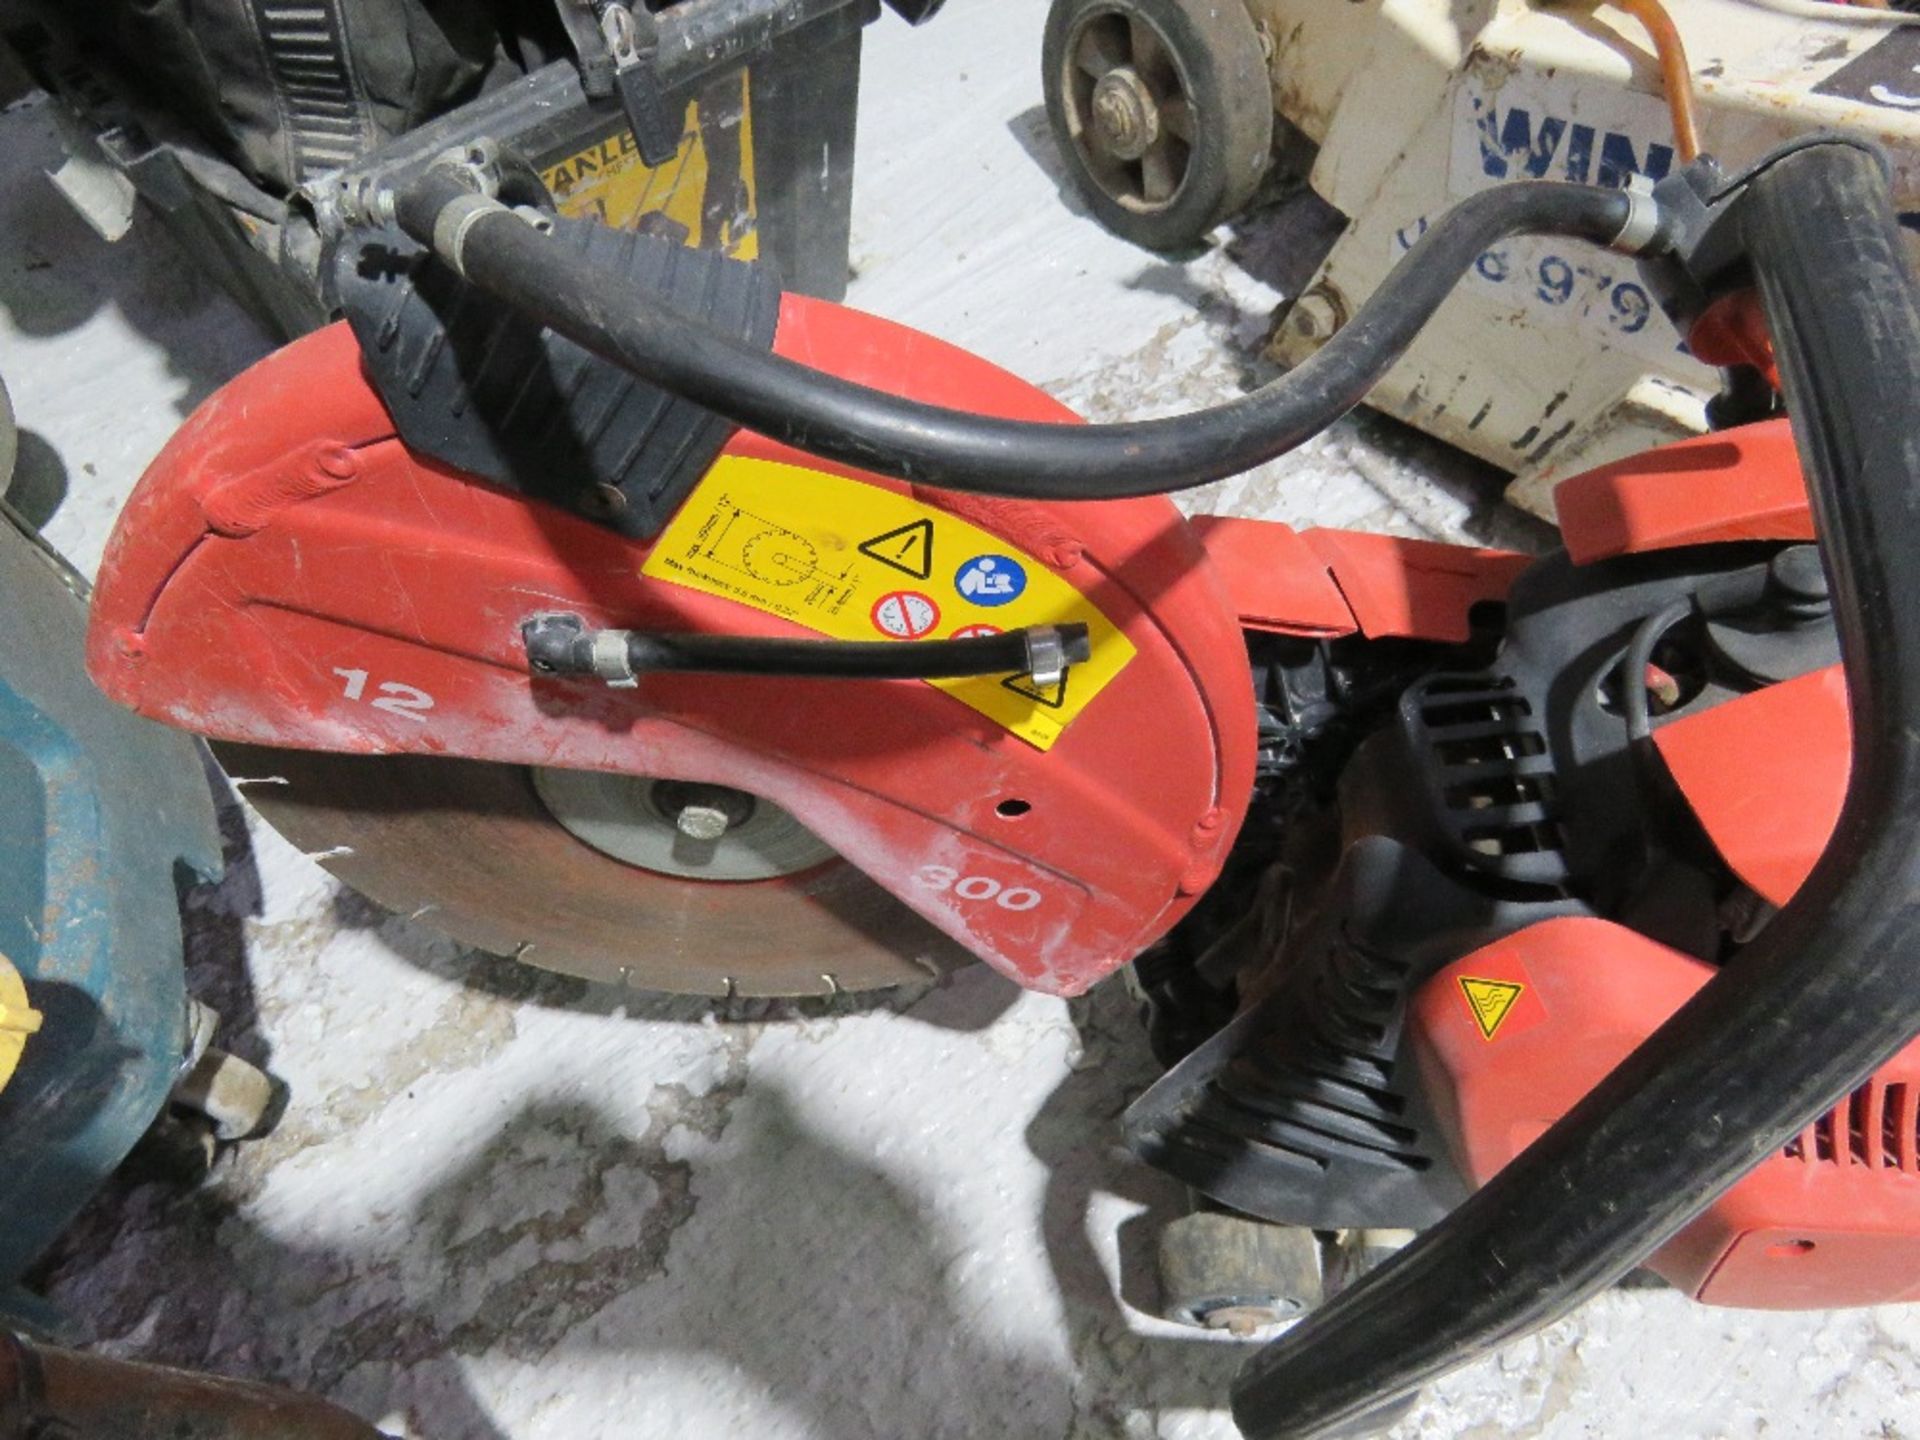 HILTI DSH700 PETROL ENGINED CUT OFF SAW WITH BLADE. SOURCED FROM LOCAL DEPOT CLOSURE. - Image 4 of 4